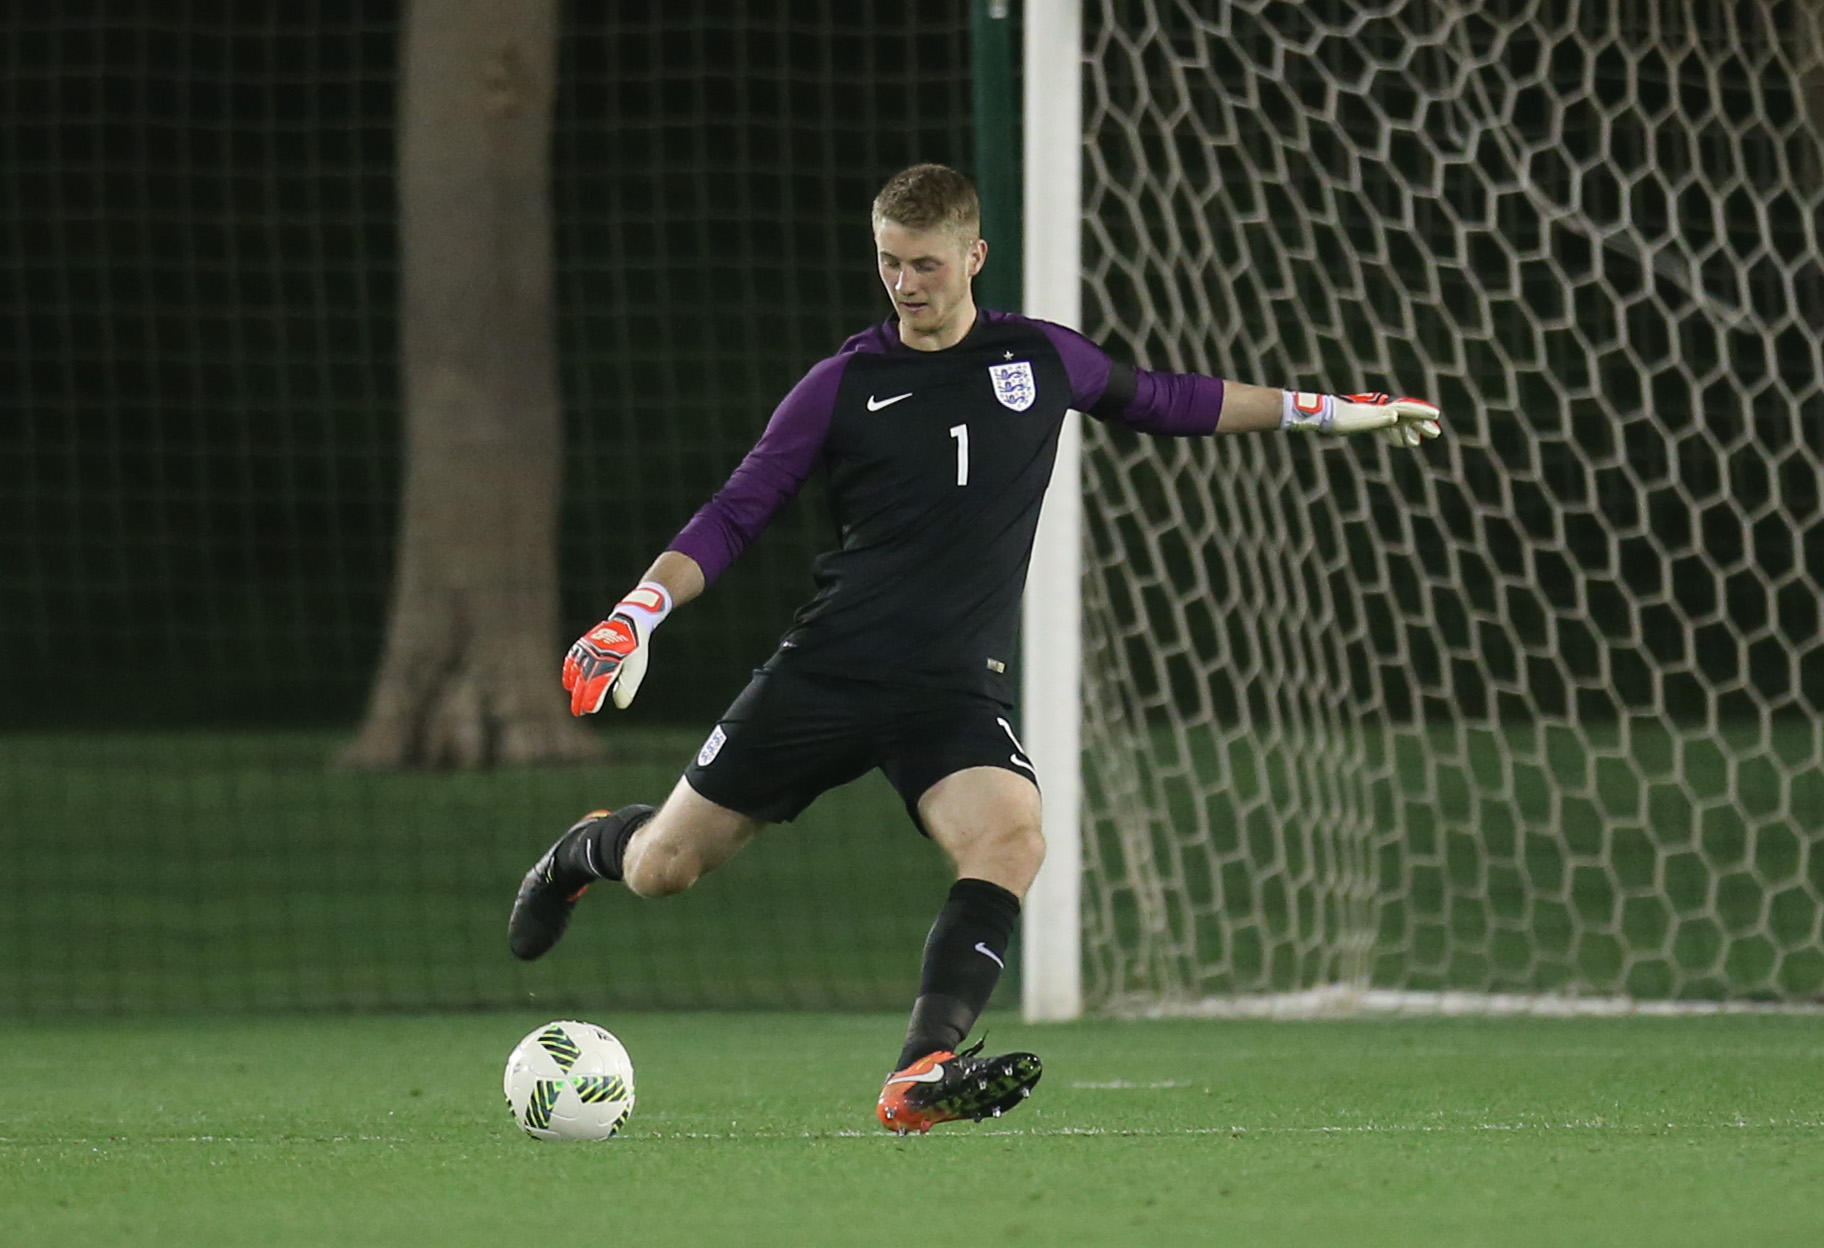 DOHA, QATAR - MARCH 24 :Jake Turner ,Goal Keeper  of England in action against during the England and Qatar U 18 friendly match at the Aspire pitch on March 24, 2017 in Doha, Qatar. (Photo by AK BijuRaj/Getty Images)